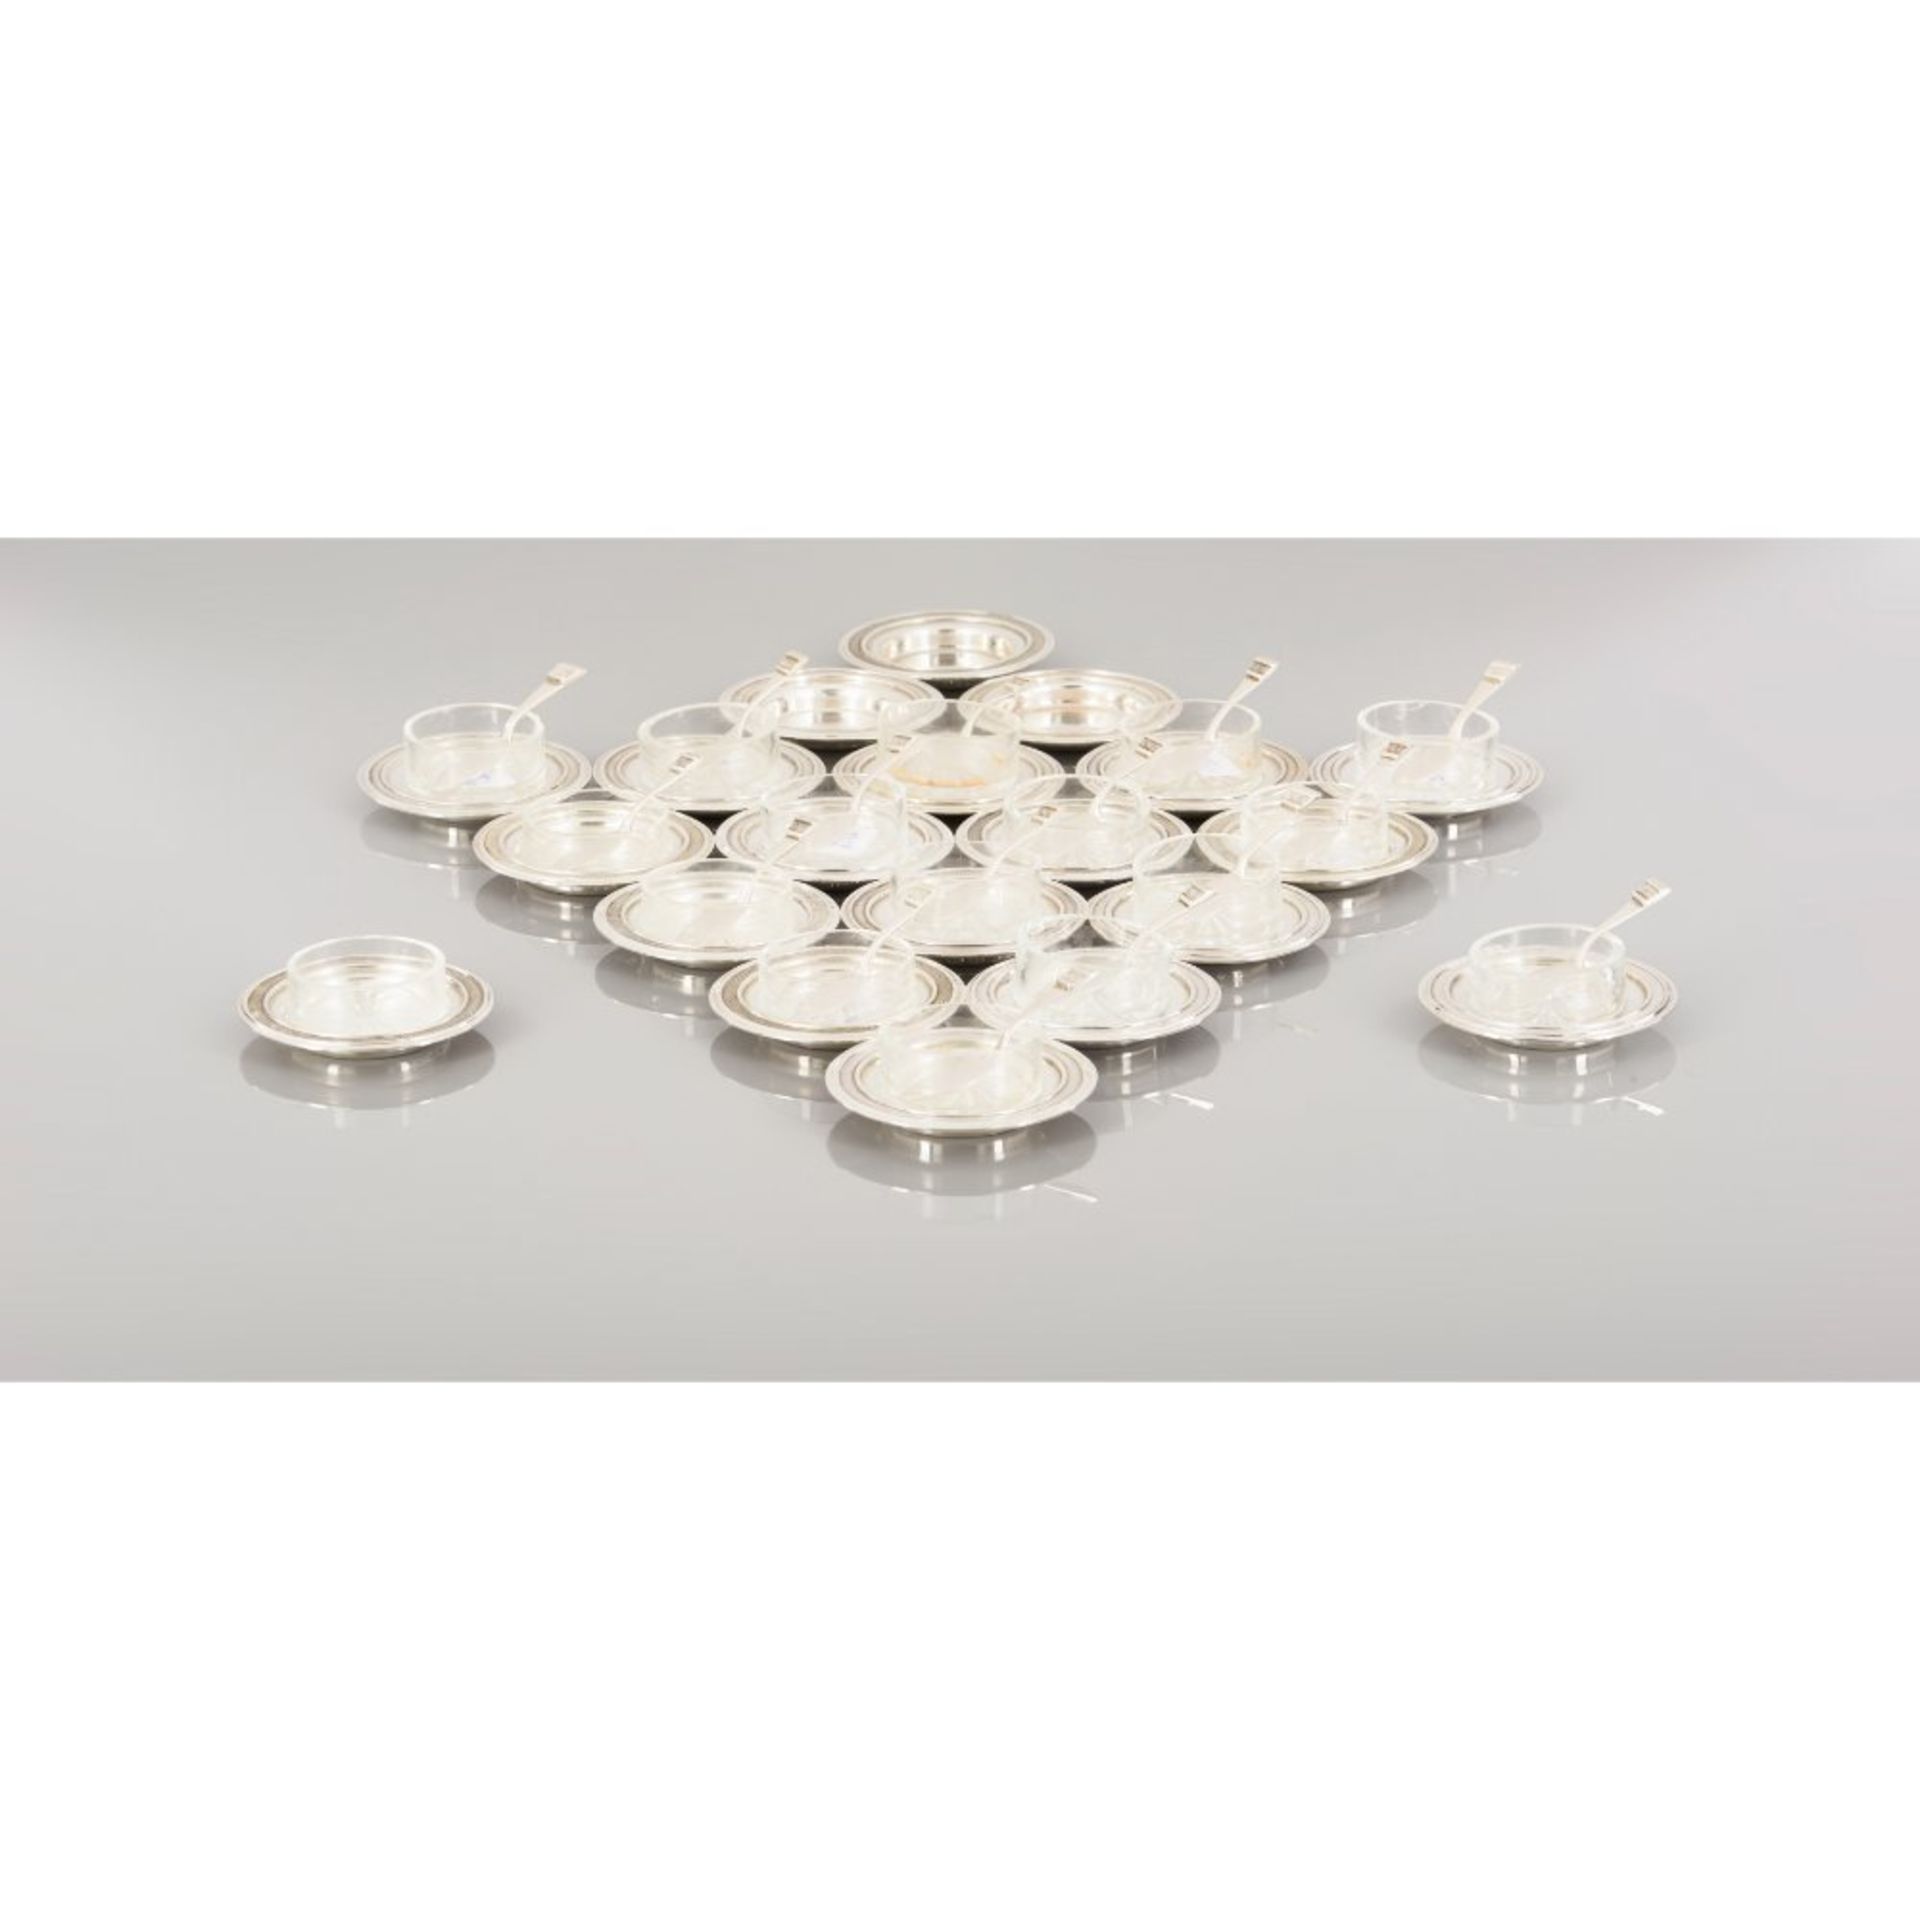 A set of twenty butter dishes